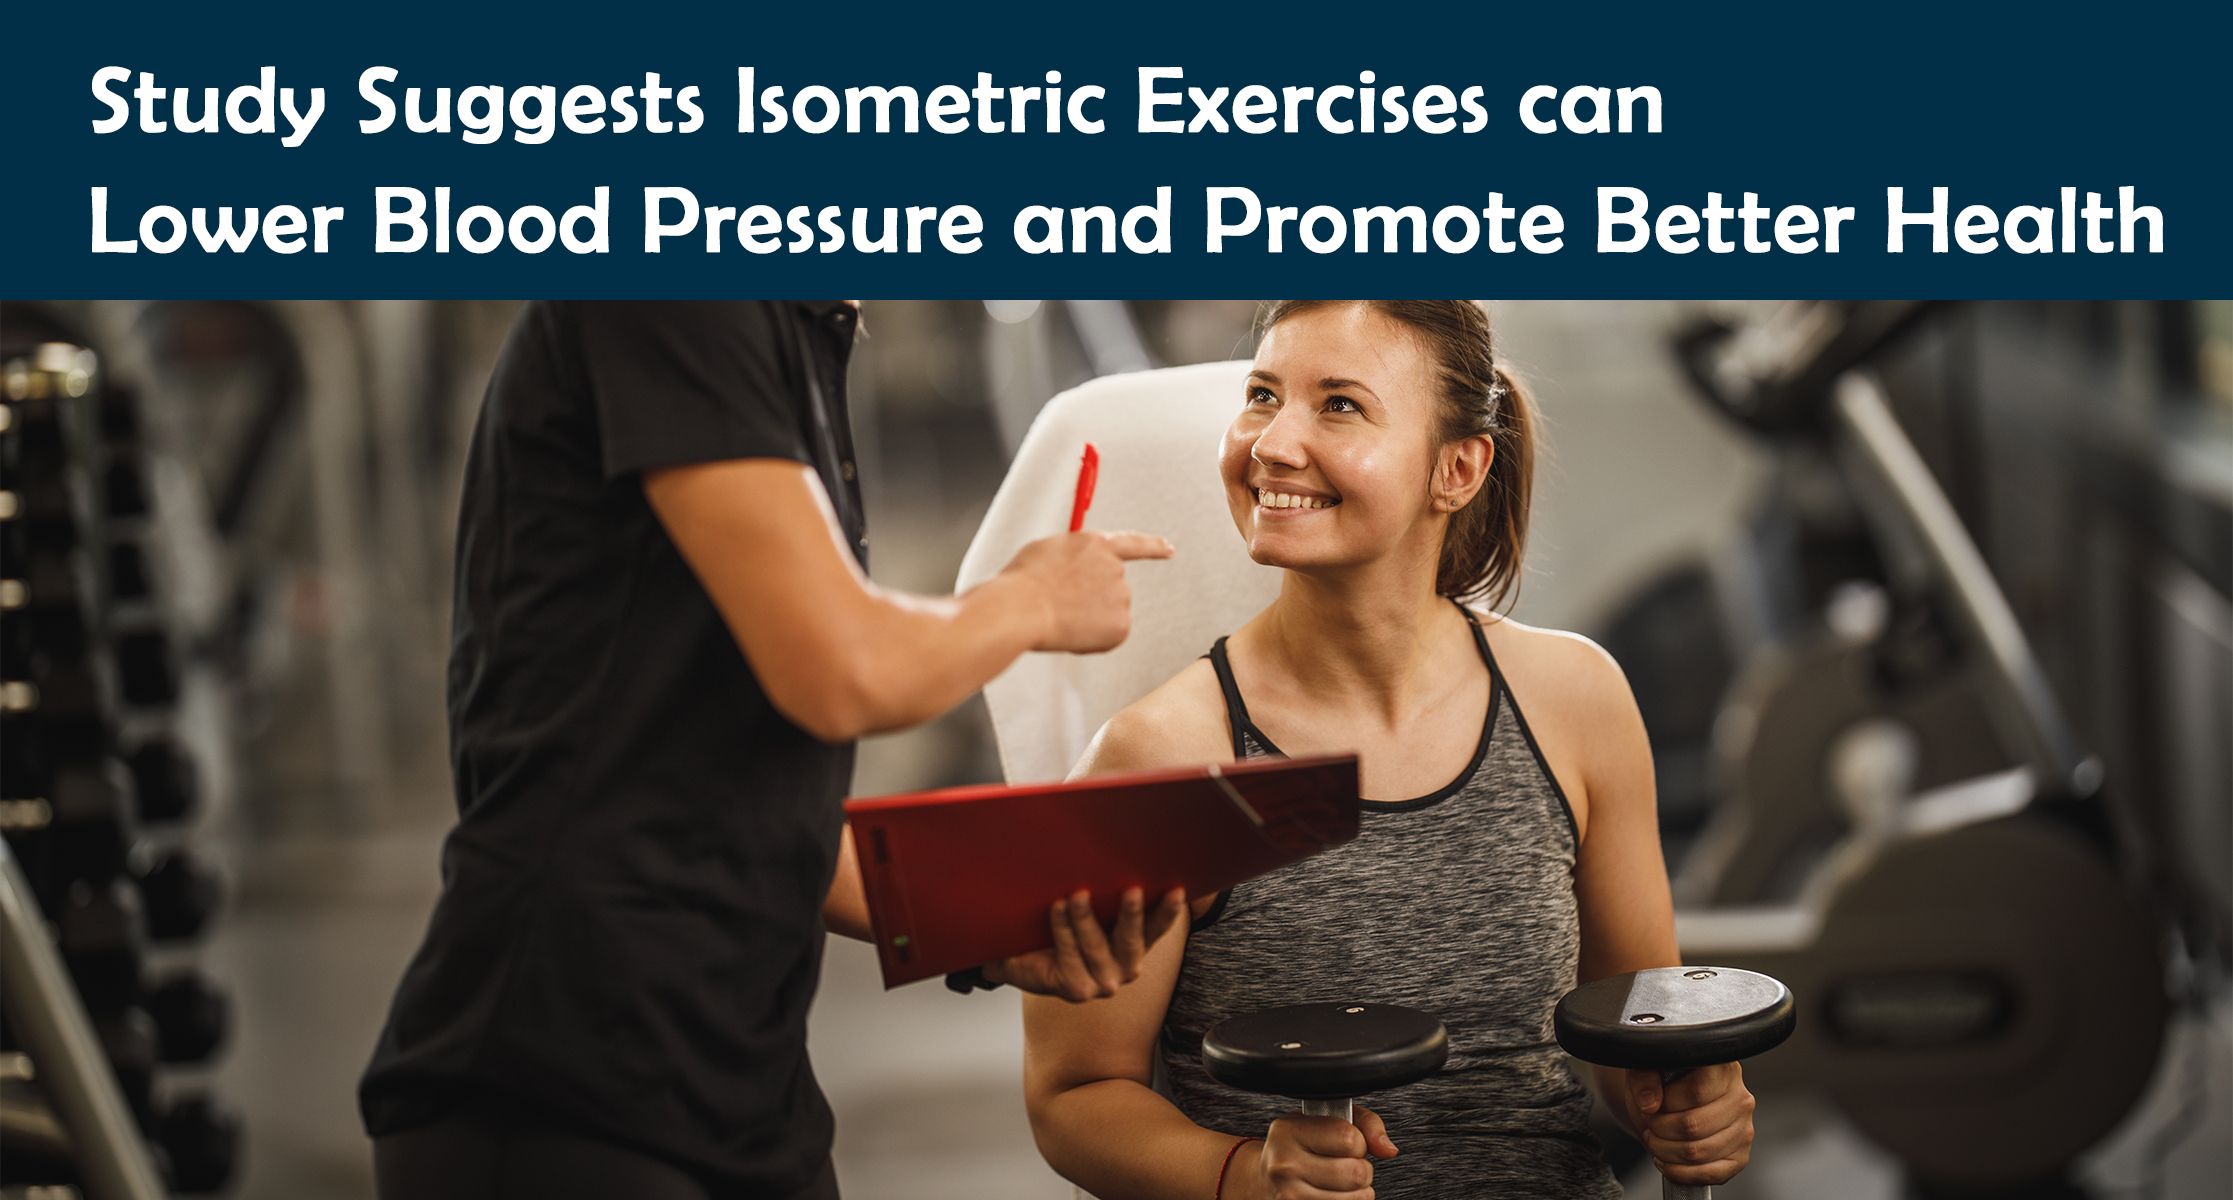 Study Suggests Isometric Exercises can Lower Blood Pressure and Promote Better Health